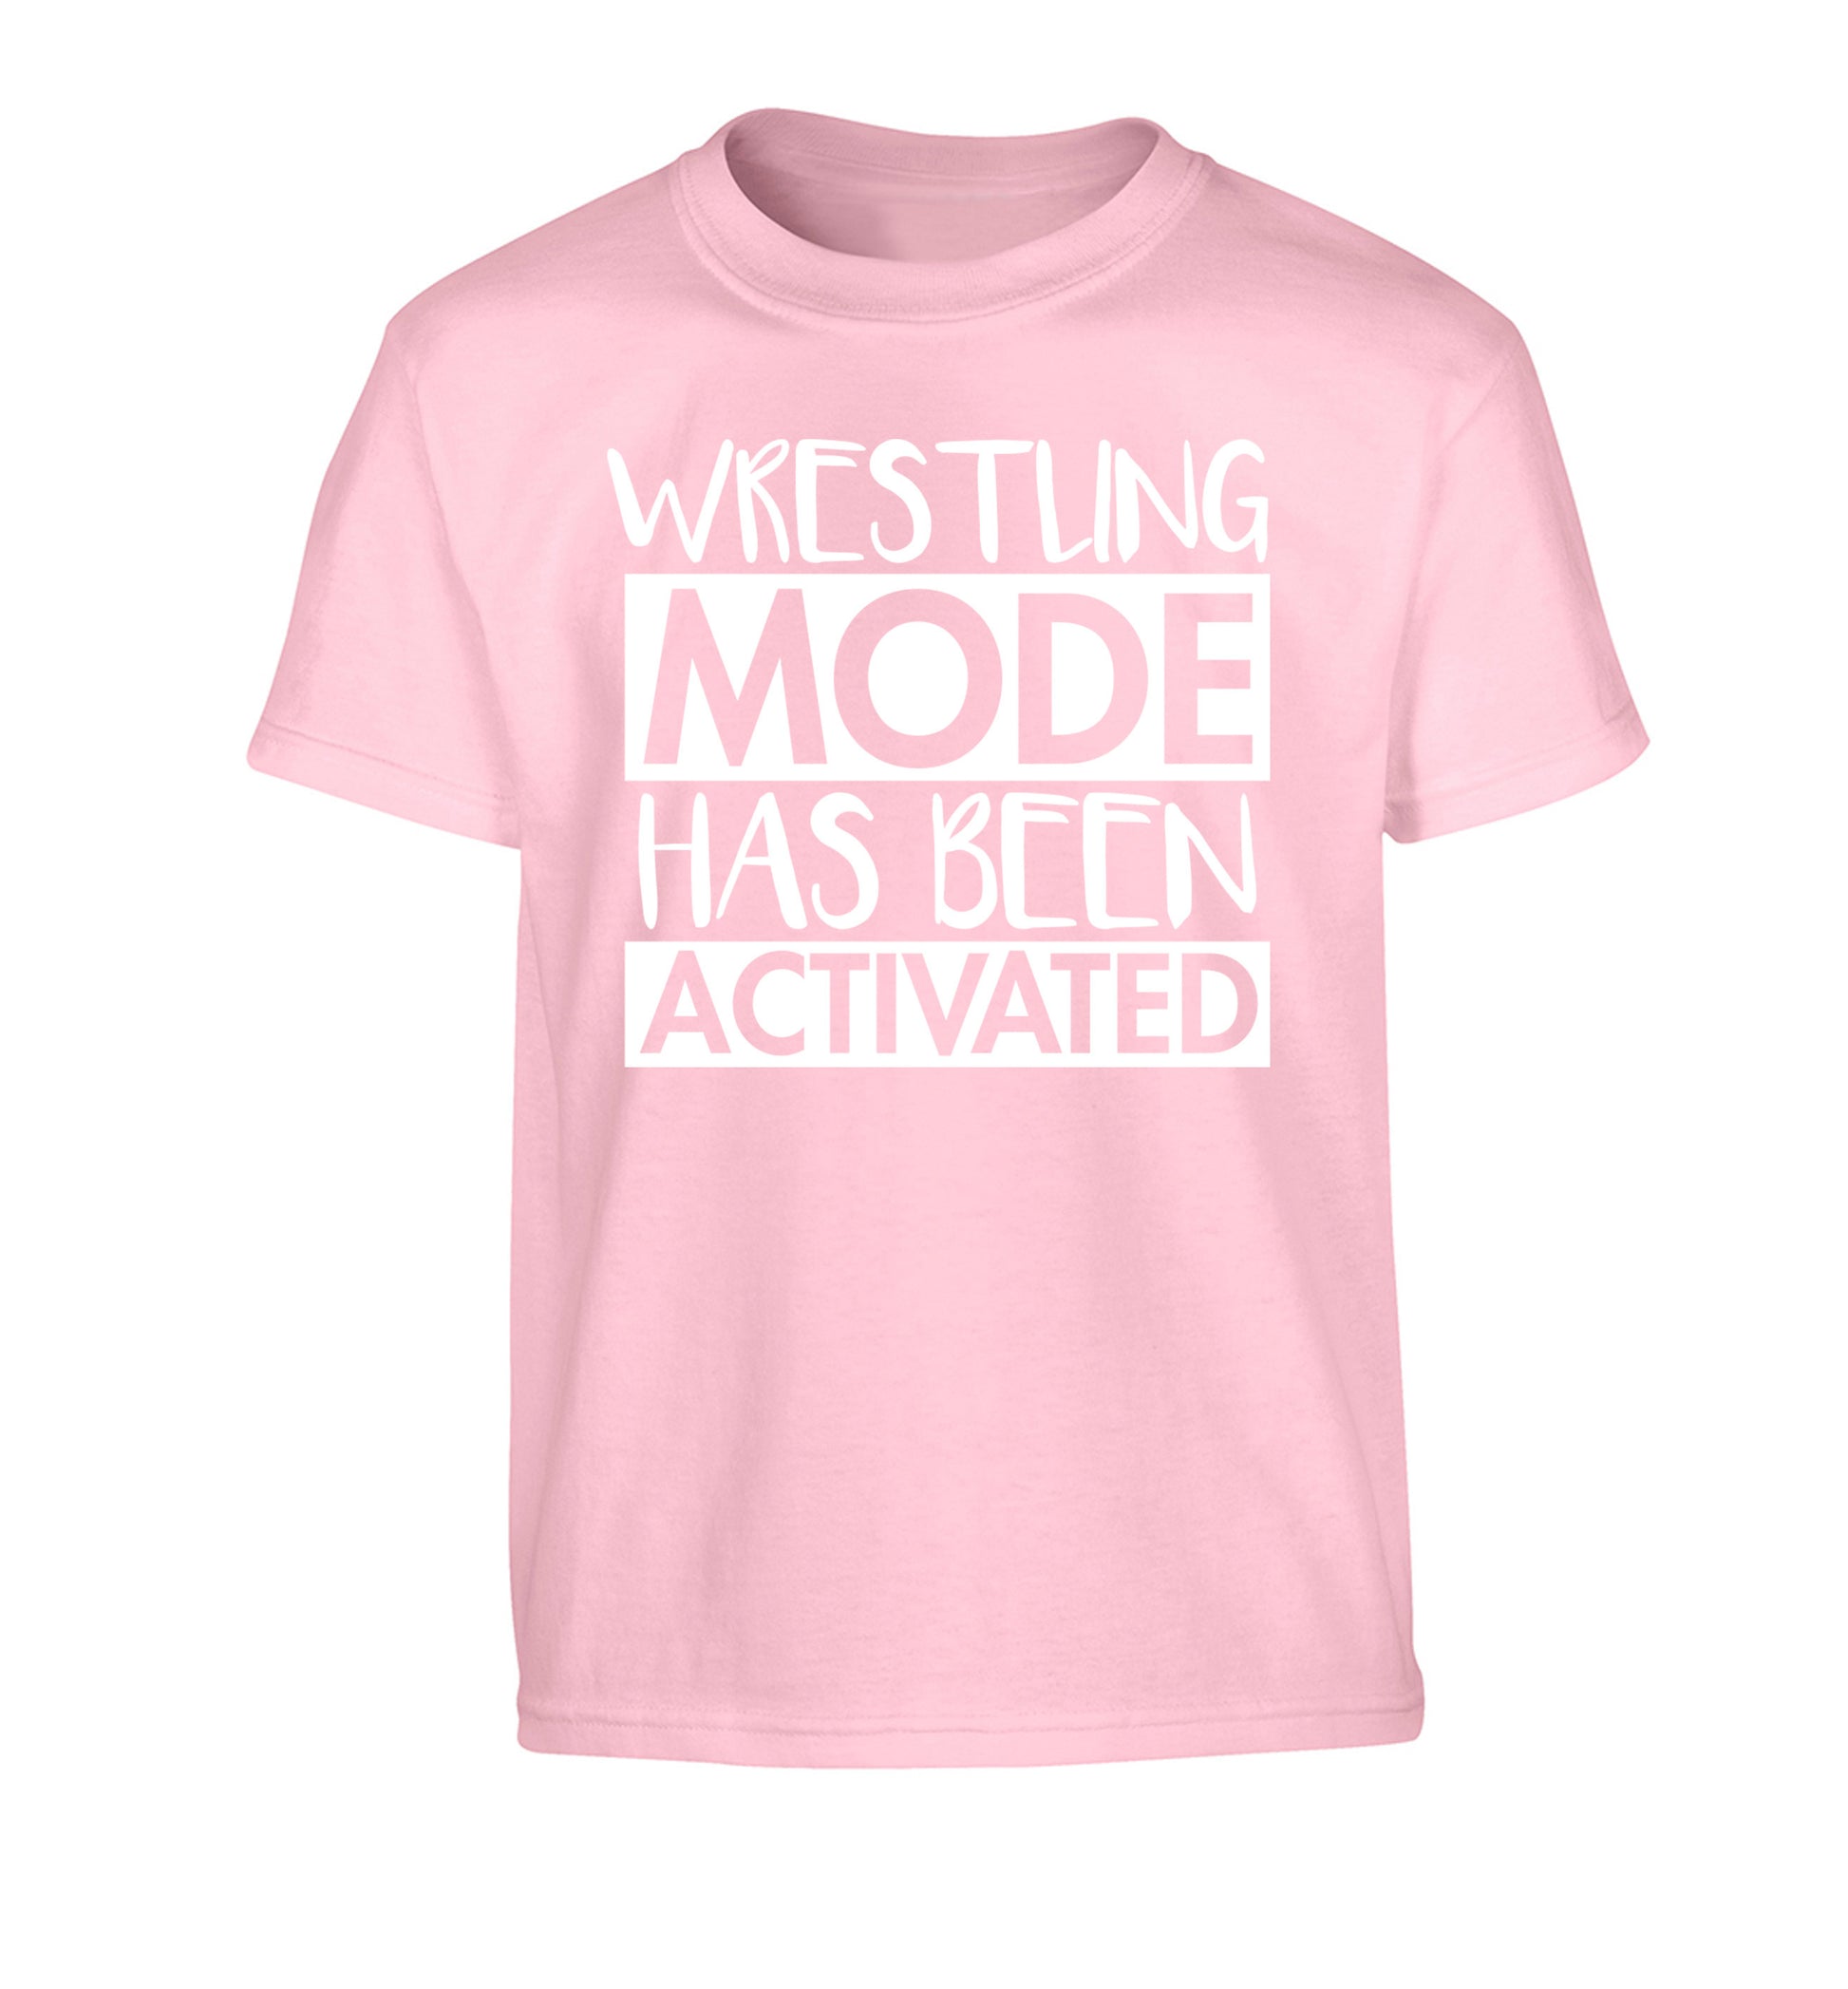 Wresting mode activated Children's light pink Tshirt 12-14 Years